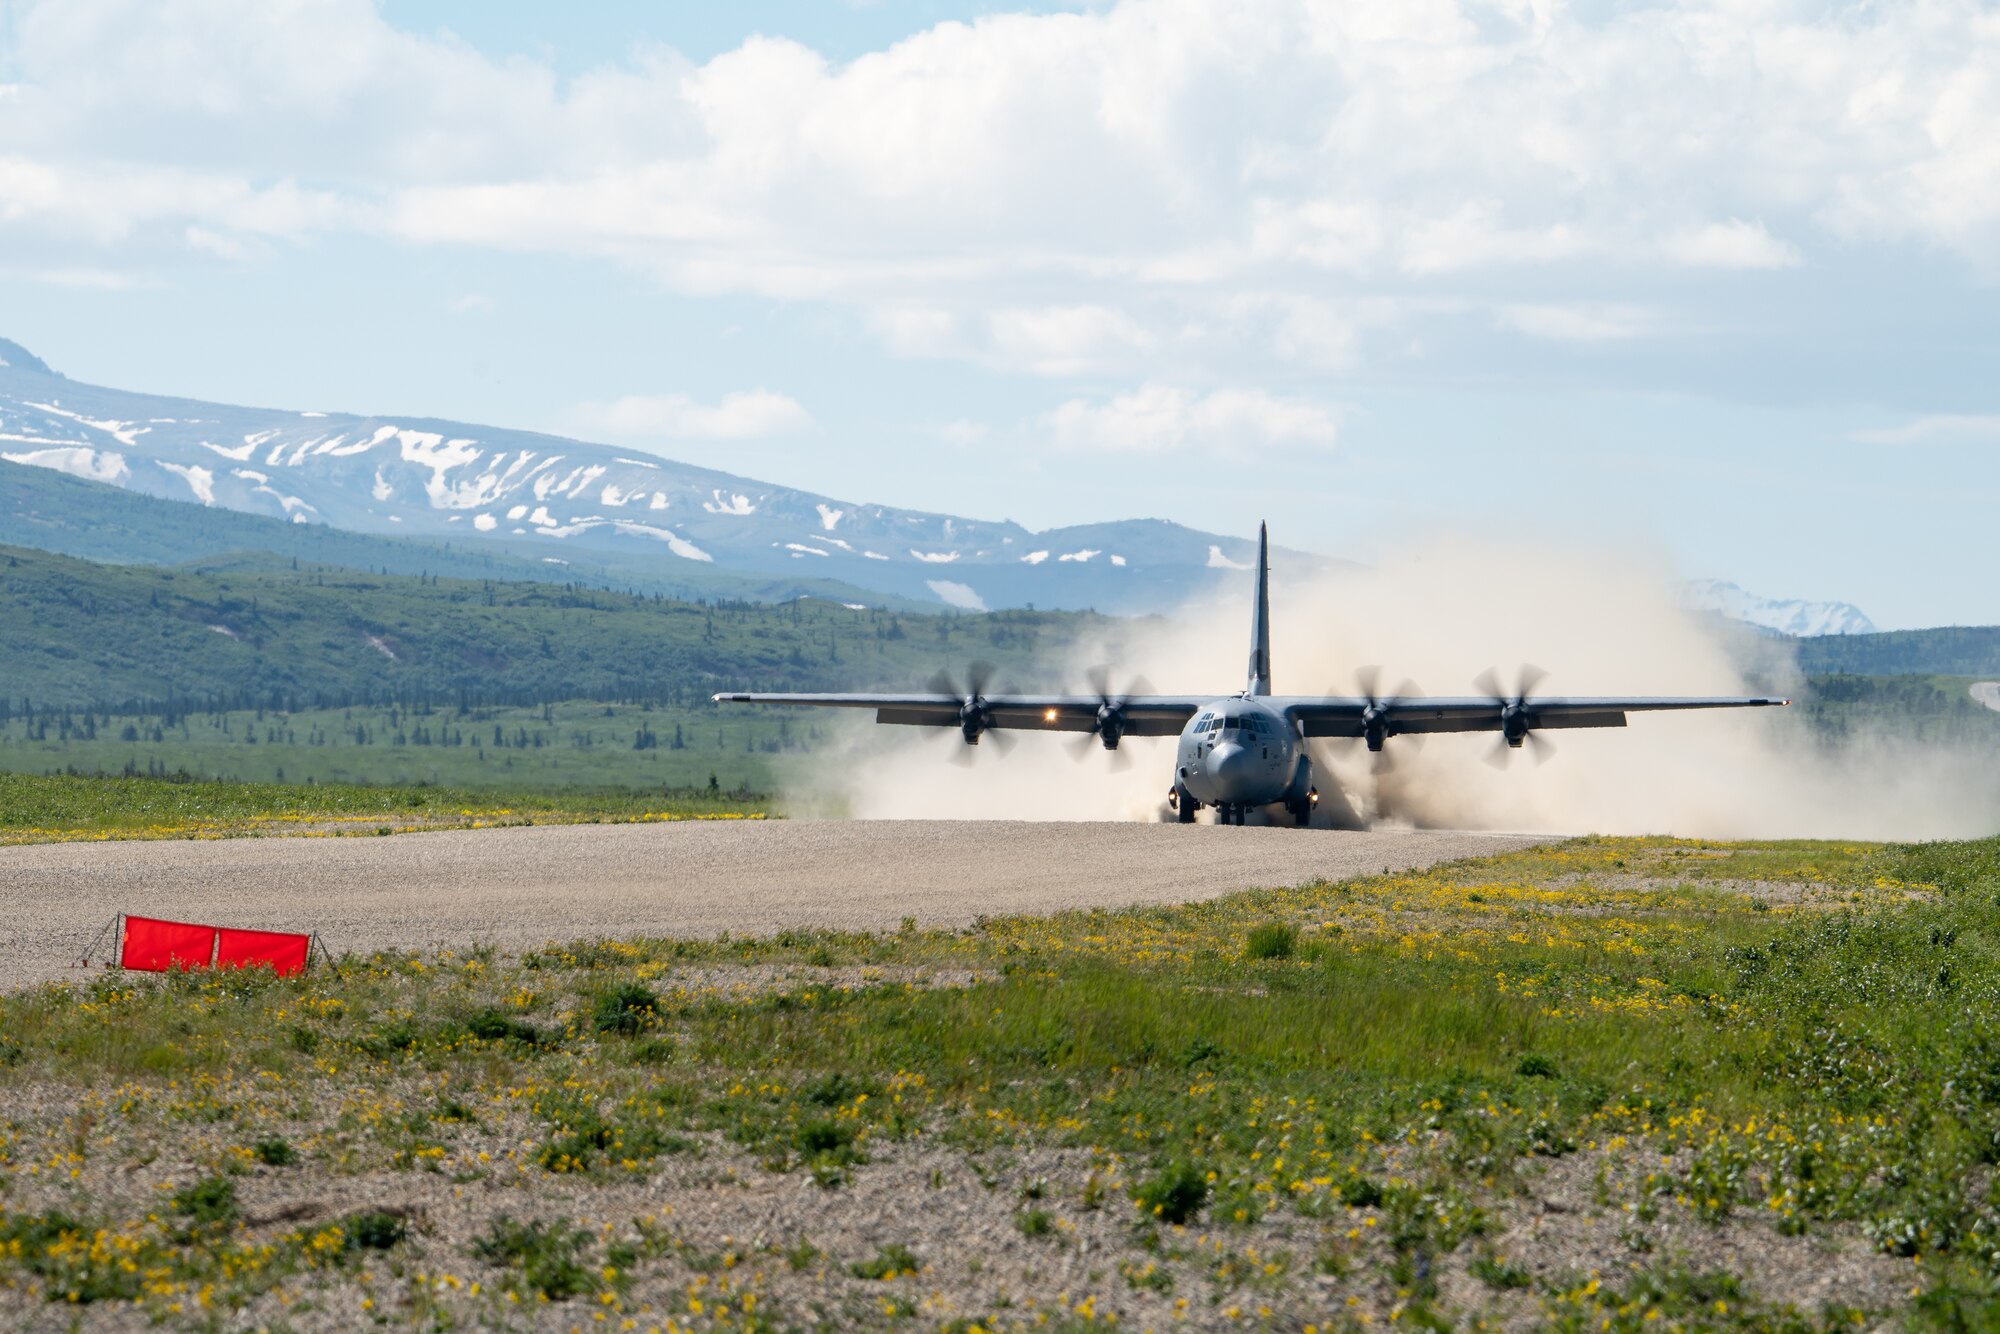 A C-130 takes off from a dirt runway.